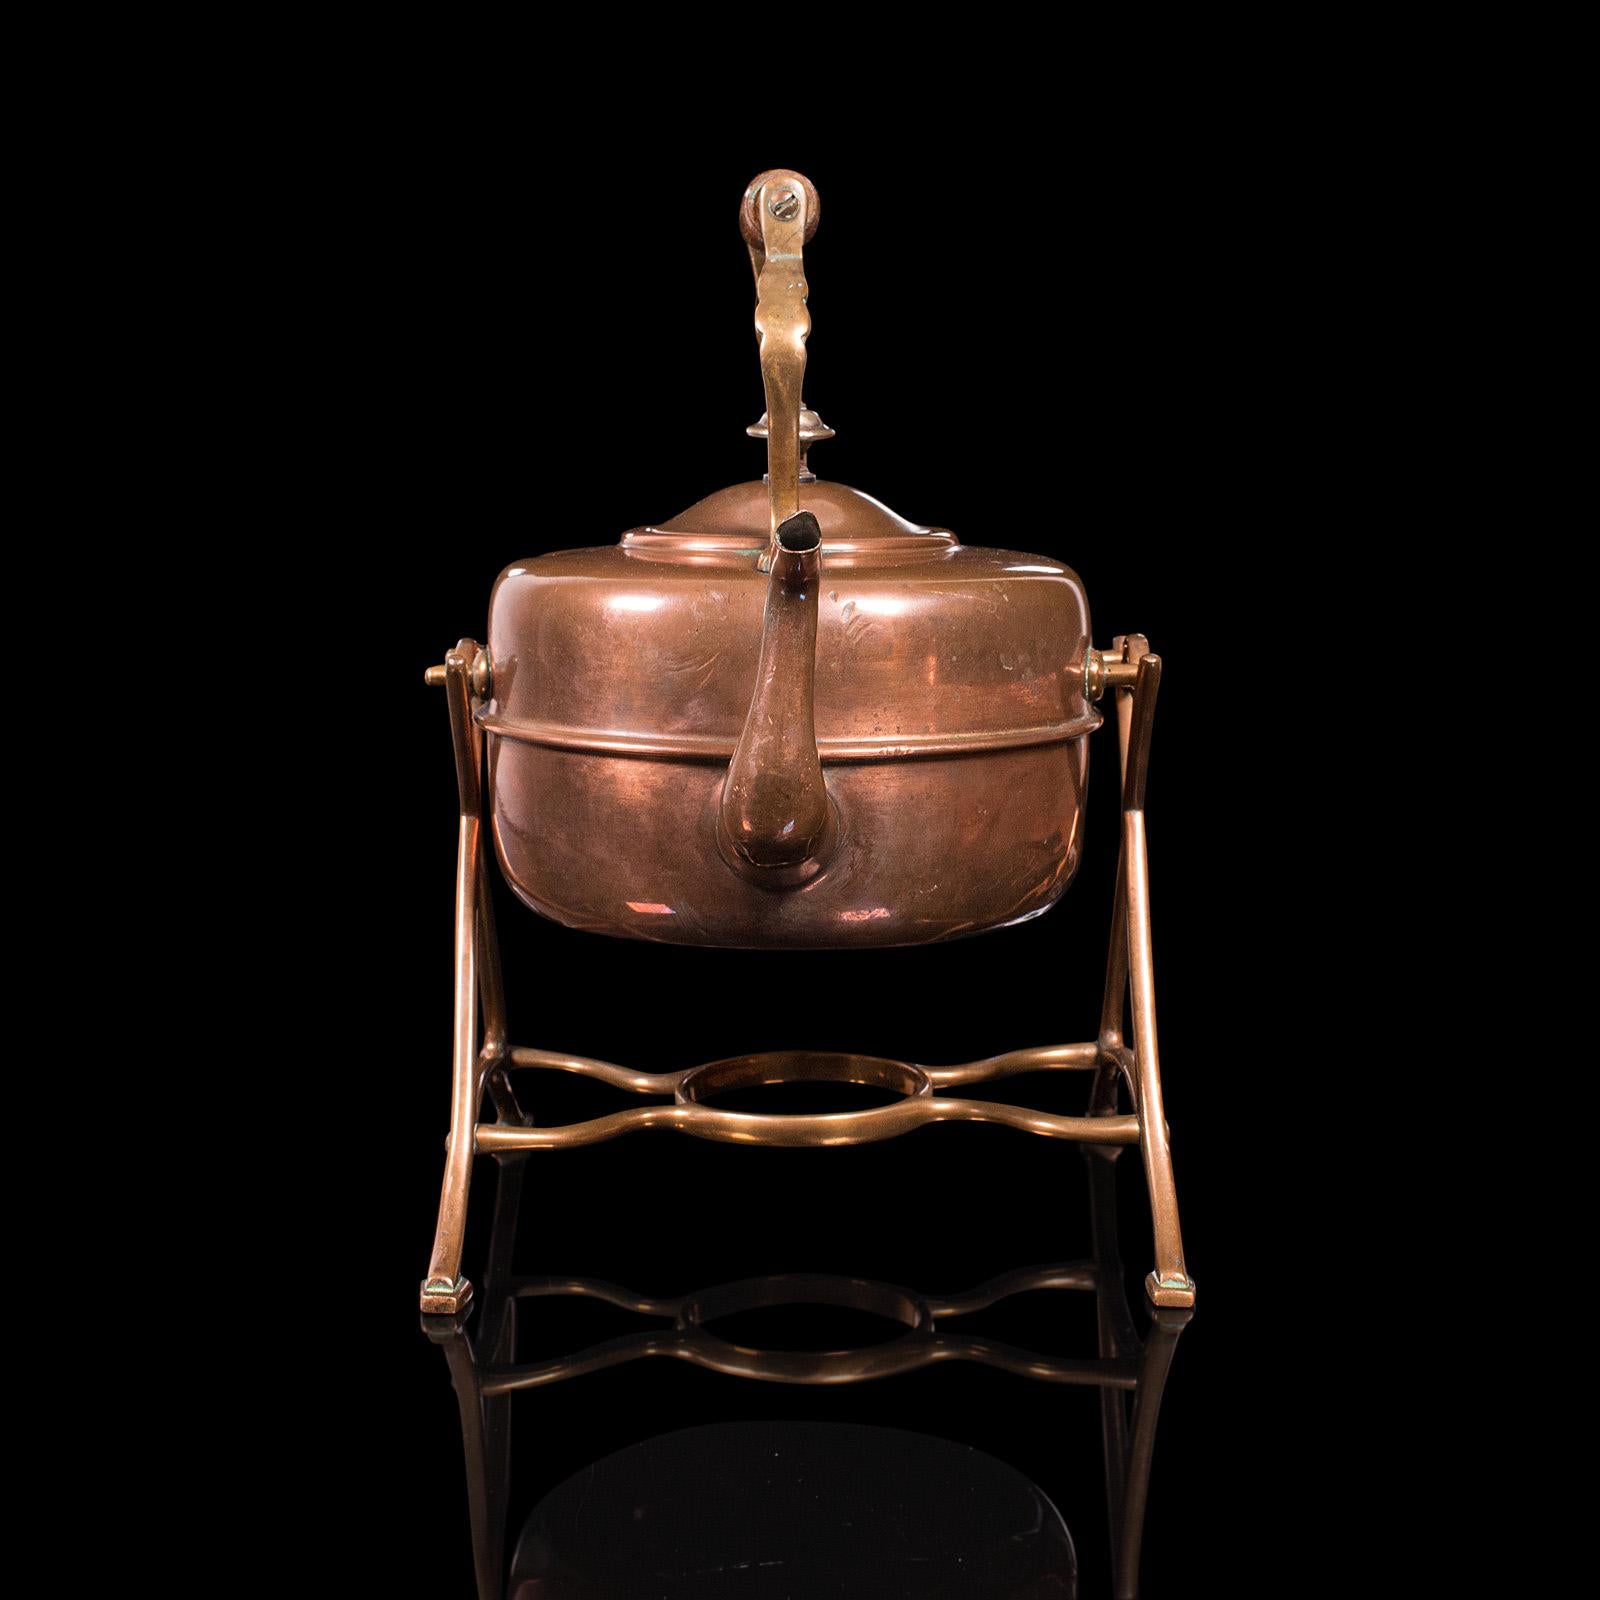 This is an antique spirit kettle. An English, copper and brass teakettle on stand, dating to the Victorian period, circa 1900.

Eye-catching antique kettle with fascinating stand
Displays a desirable aged patina throughout
Lightly polished